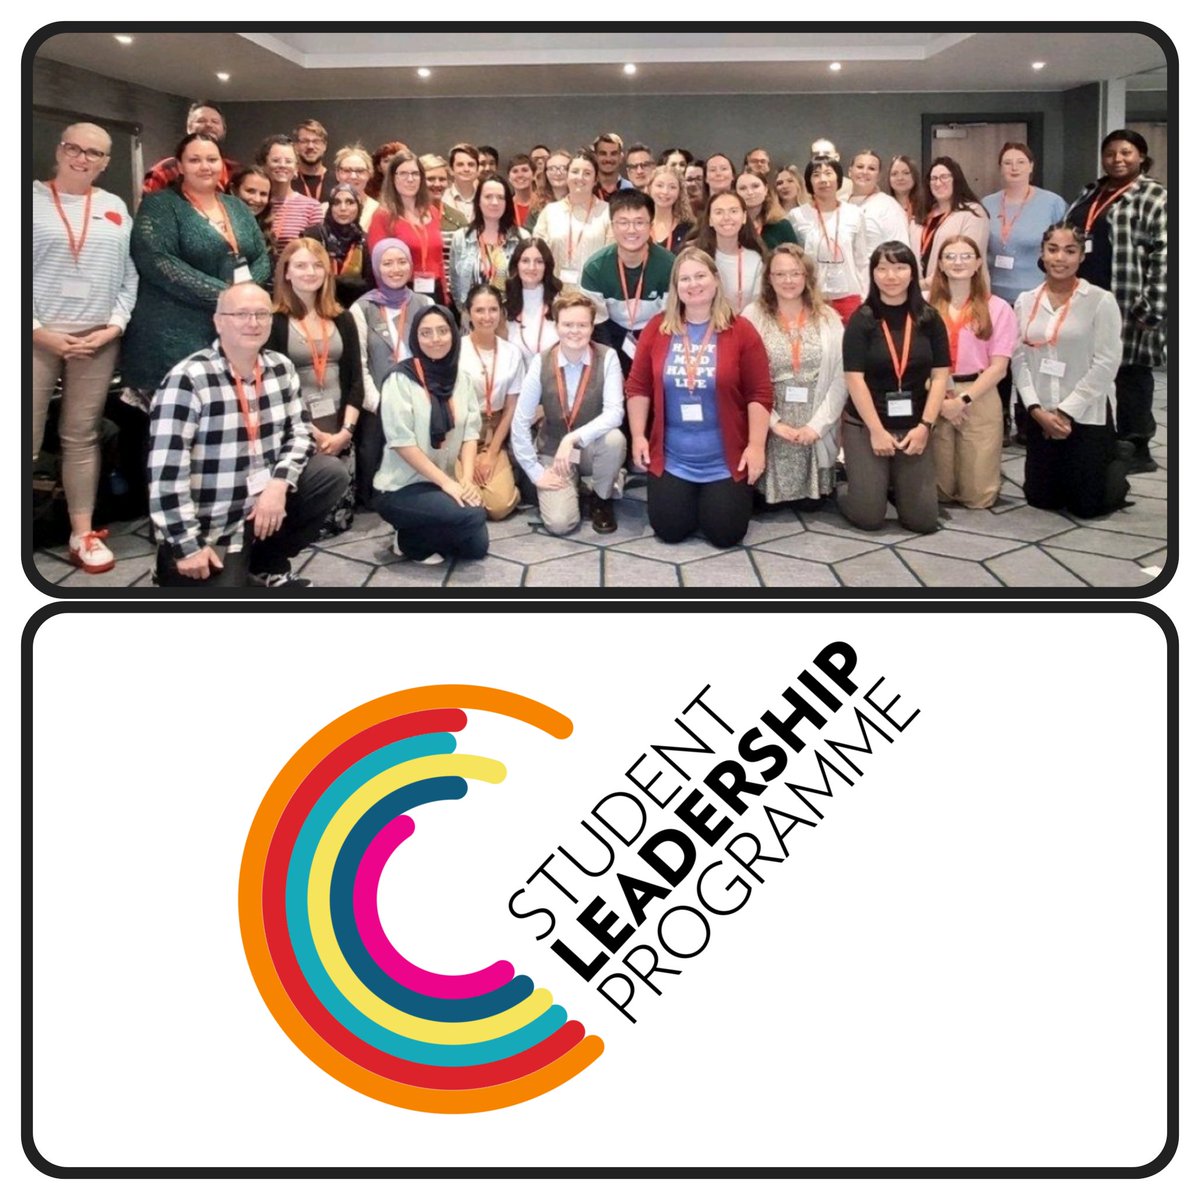 Today was our official closing conference for The Student Leadership Programme. I have grown in confidence throughout. Thank you to @councilofdeans for the opportunity and @wrexhamuniversityodp your supporting throughout. I am truly honoured
#150leaders #wrexhamuniversityodp